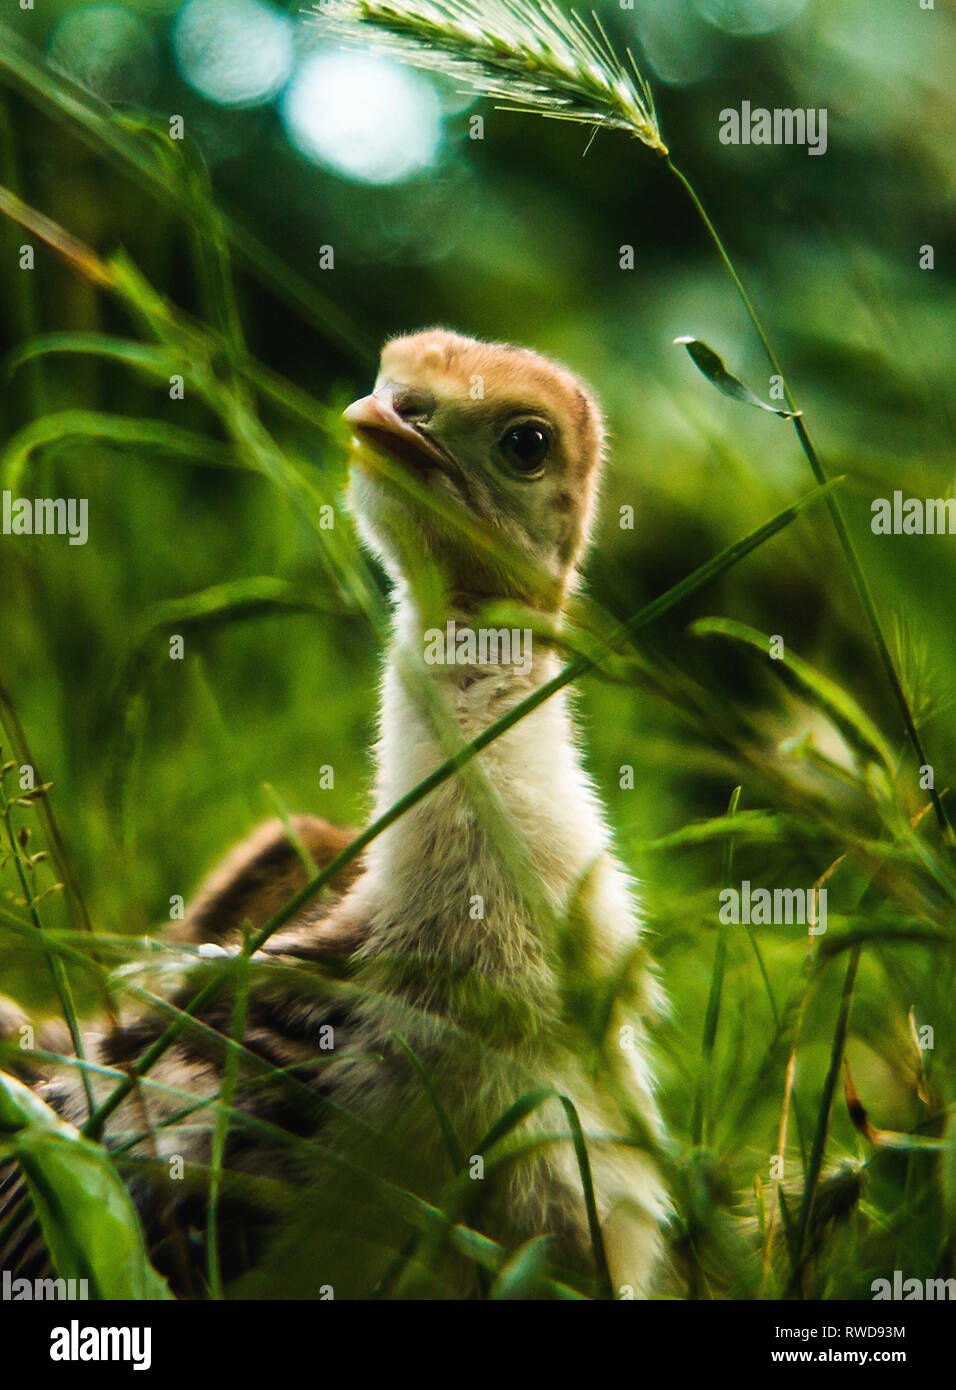 Little cute turkey-poult stay at the green grass. A Single Turkey-poult at the sunlight. Summertime nature. Stock Photo